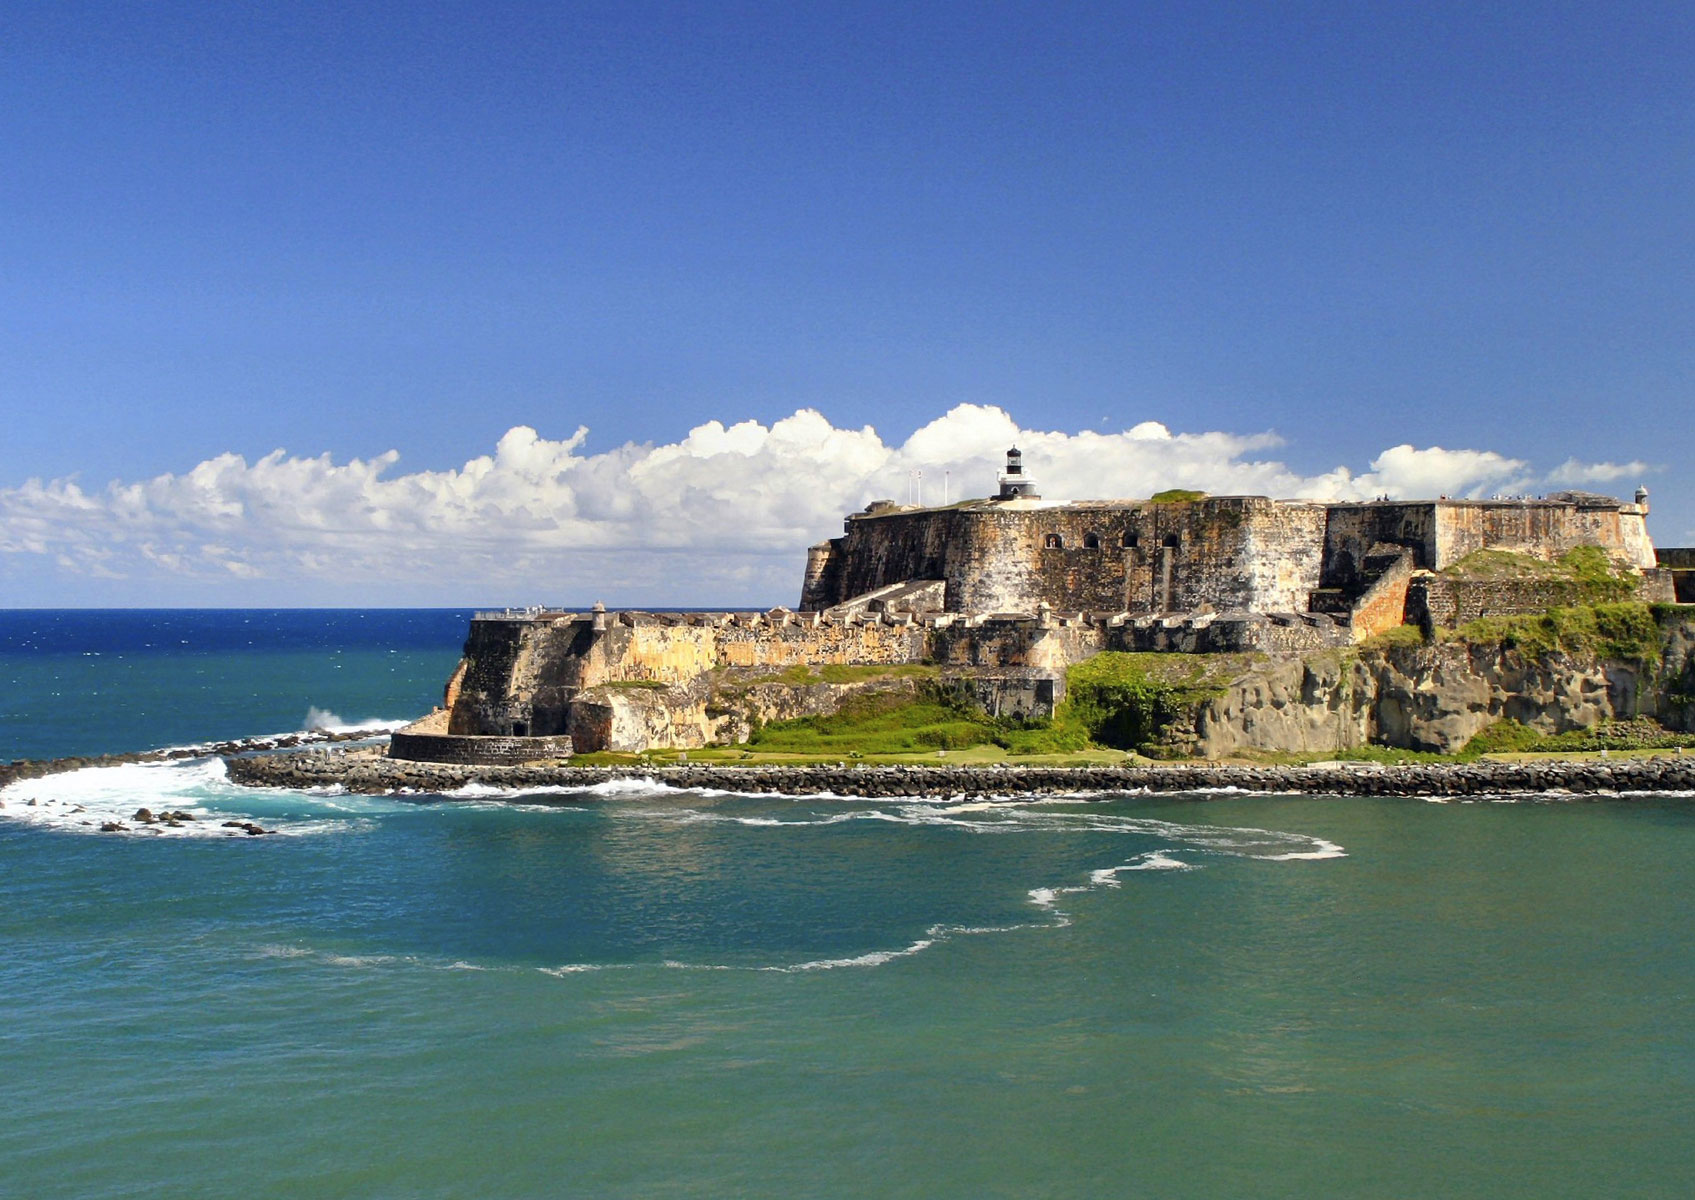 Group Adventure, Sightseeing, and Aquatic Tours in Puerto Rico